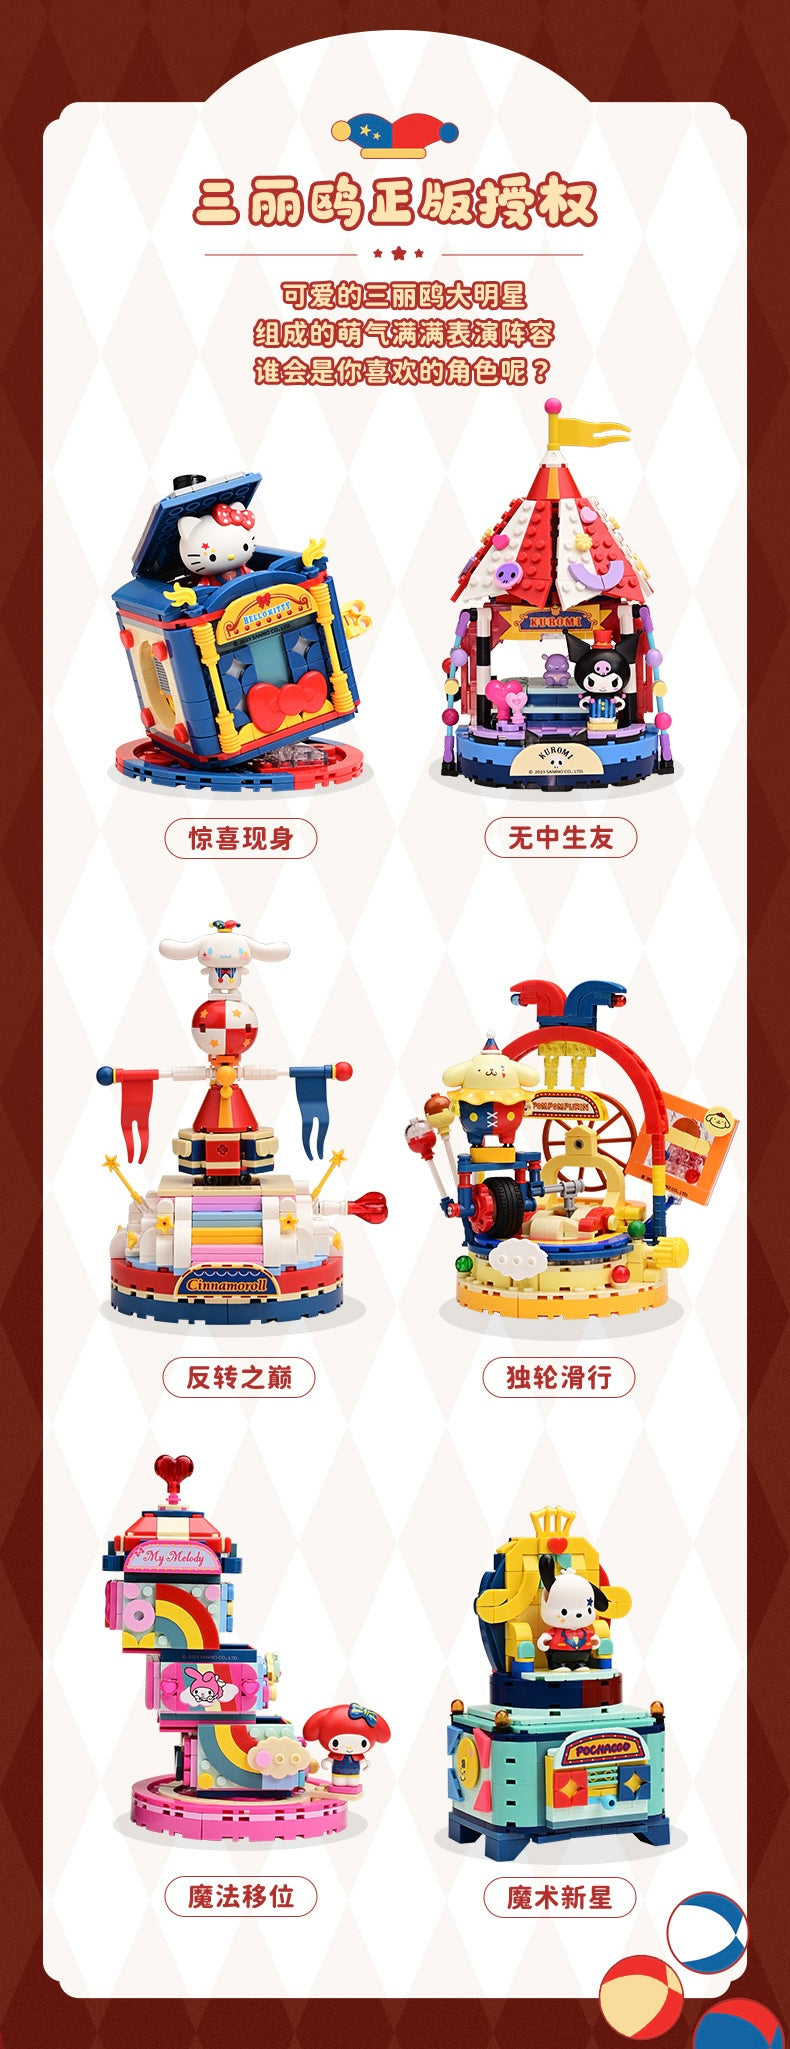 Sanrio Happy Circus My Melody - Building Blocks Toy Collections